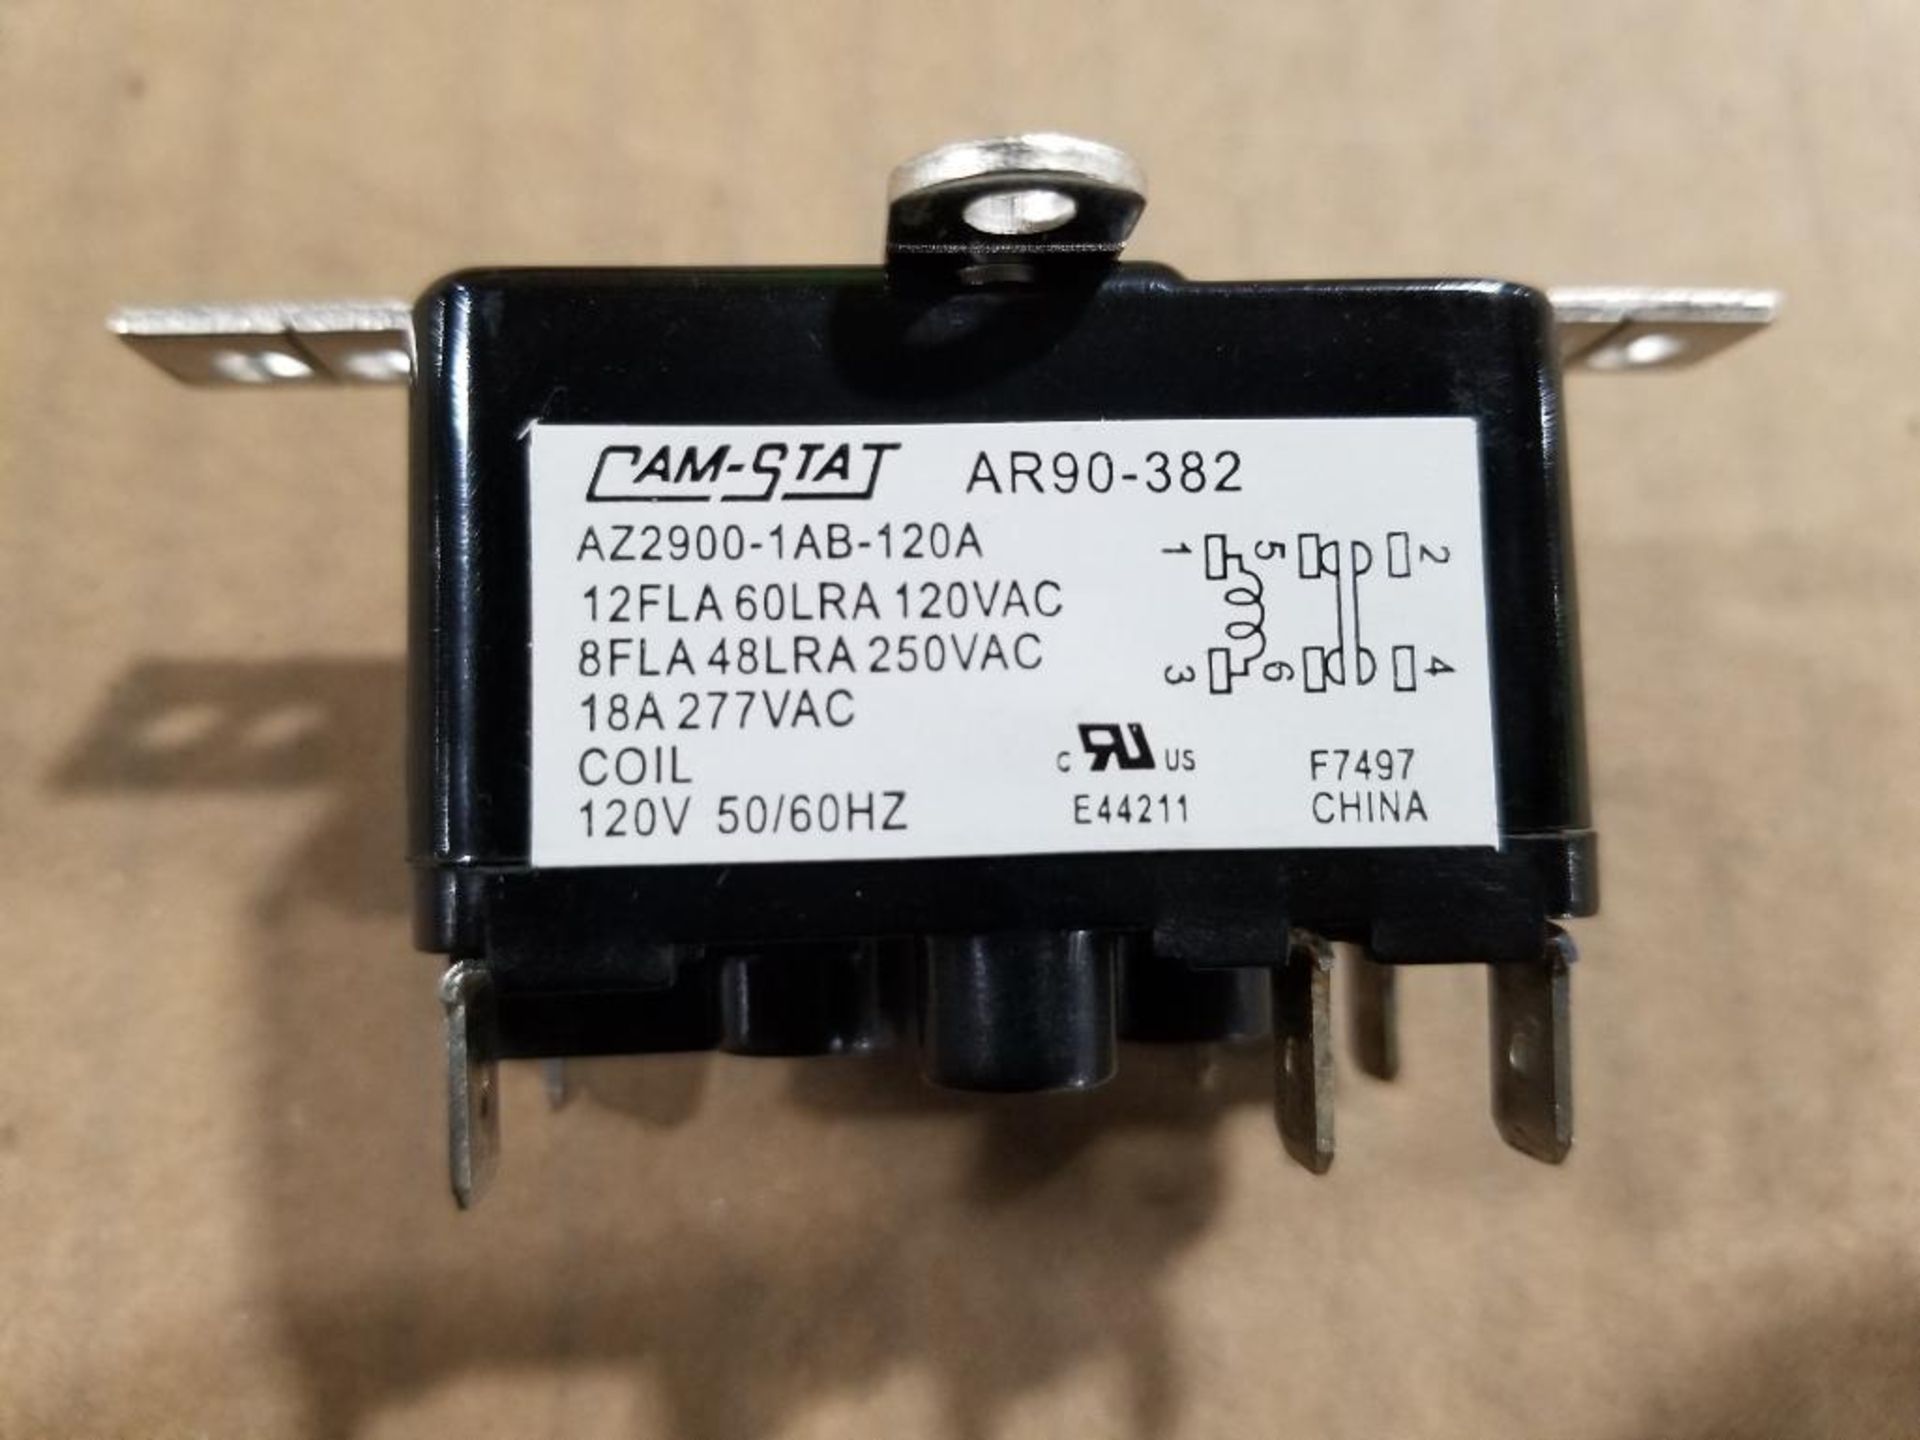 Qty 50 - Cam-stat general purpose relay. Part number AZ2900-1AB-120A. - Image 7 of 7